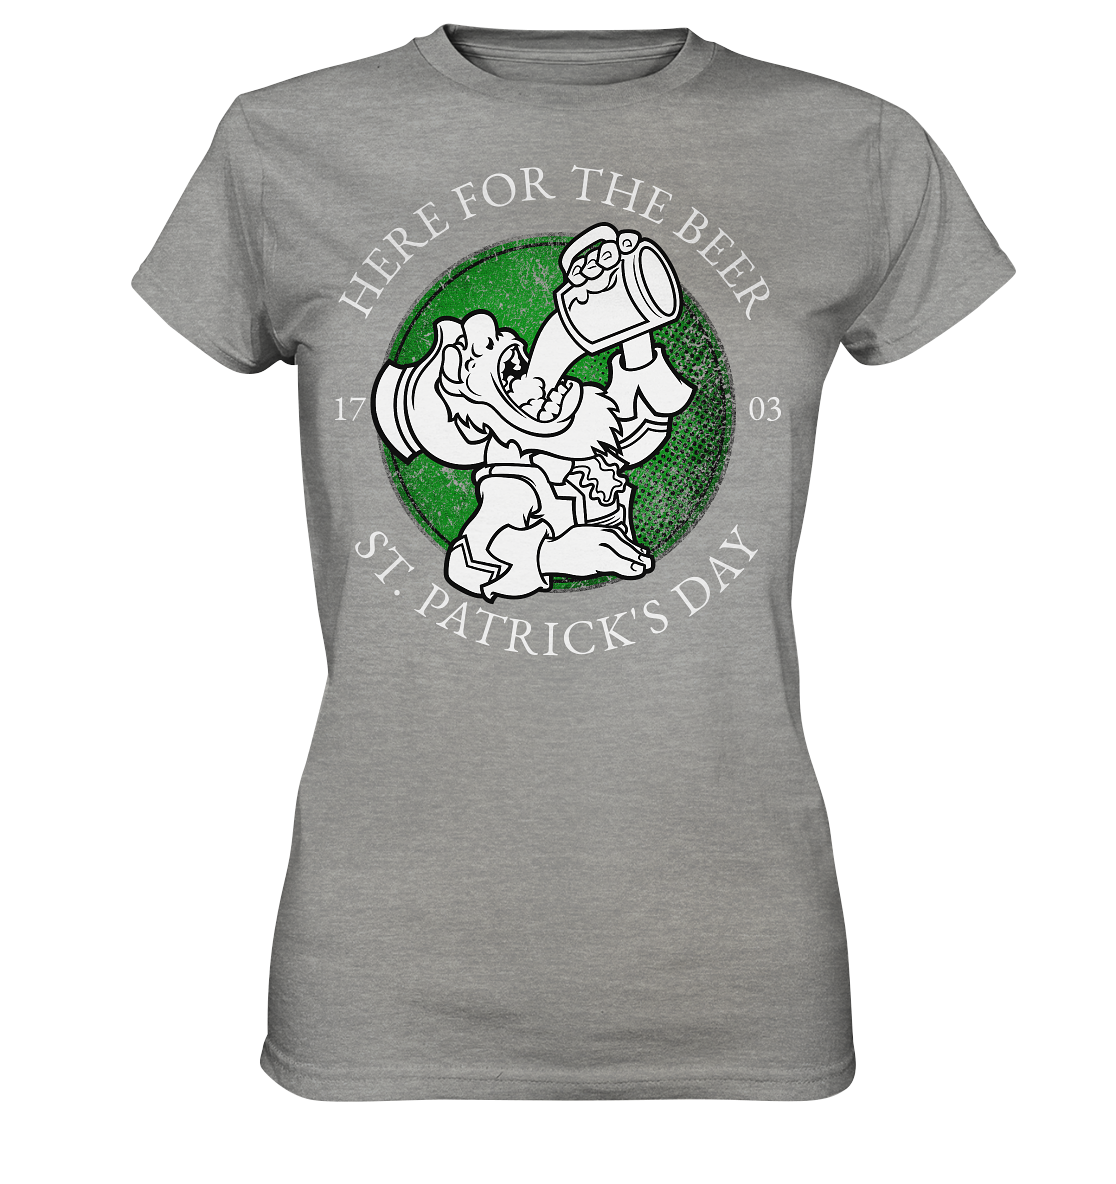 Here For The Beer "St. Patrick's Day" - Ladies Premium Shirt